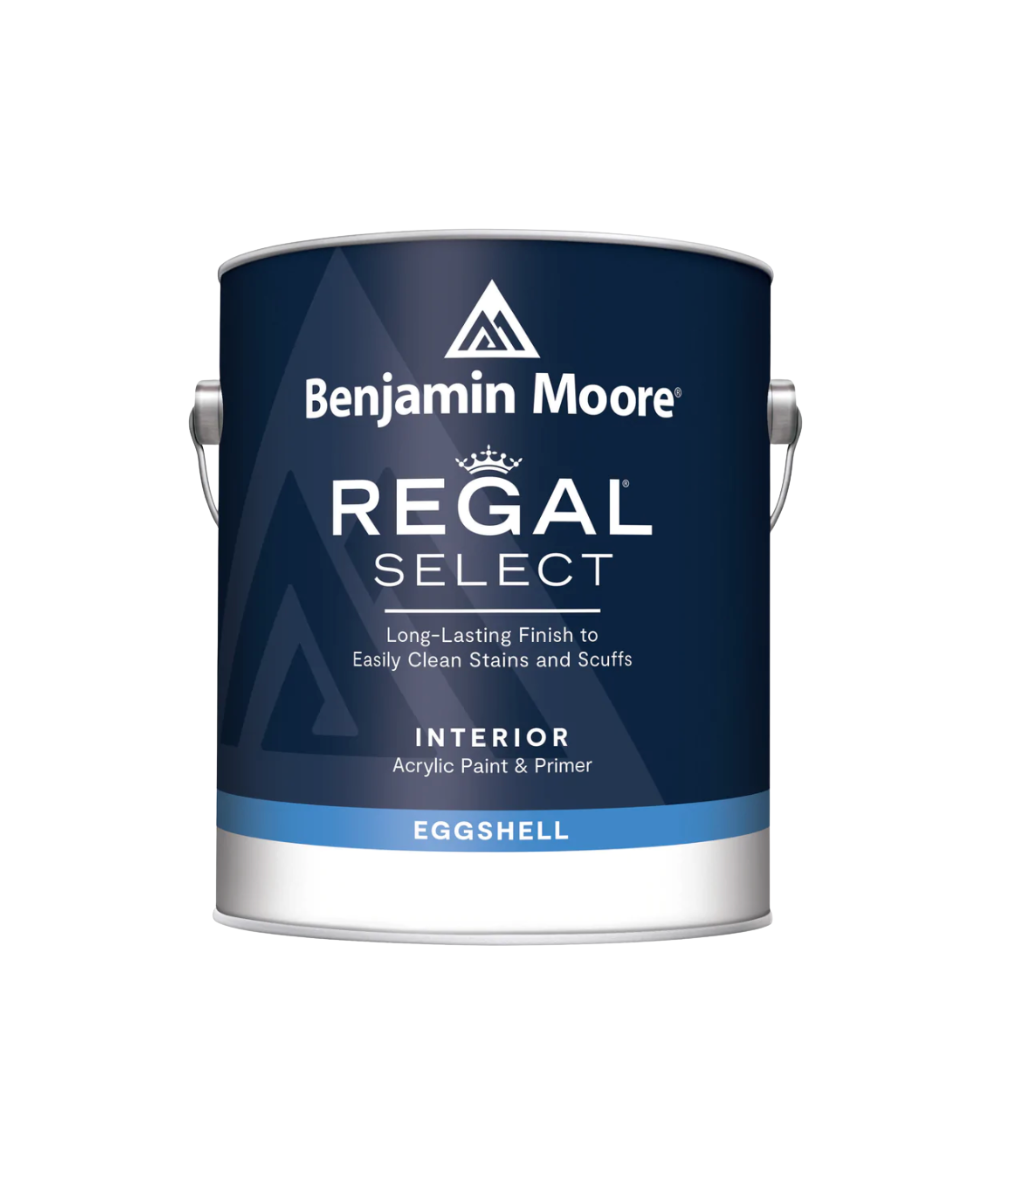 Benjamin Moore Regal Select Eggshell Paint available at Mallory Paint Stores.